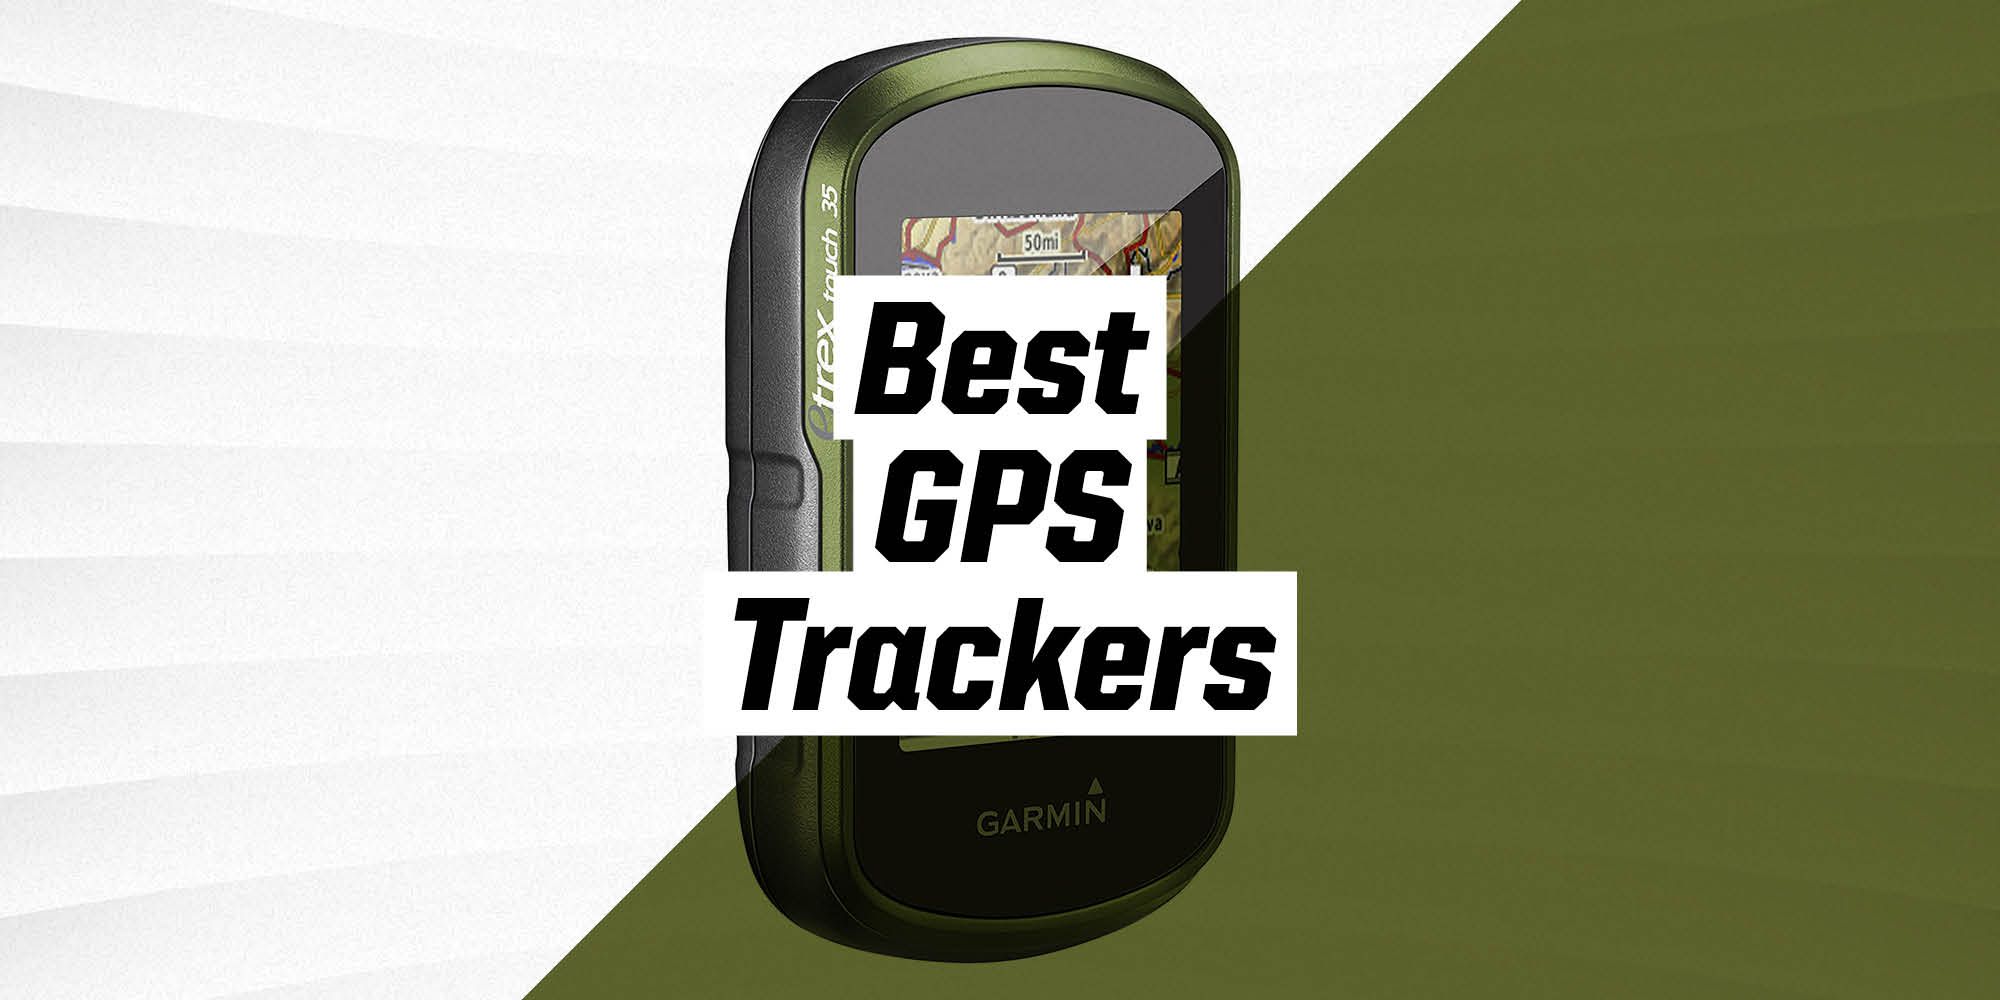 Email Protestant statistieken The 9 Best GPS Trackers 2021 - GPS Trackers for Cars & Hiking